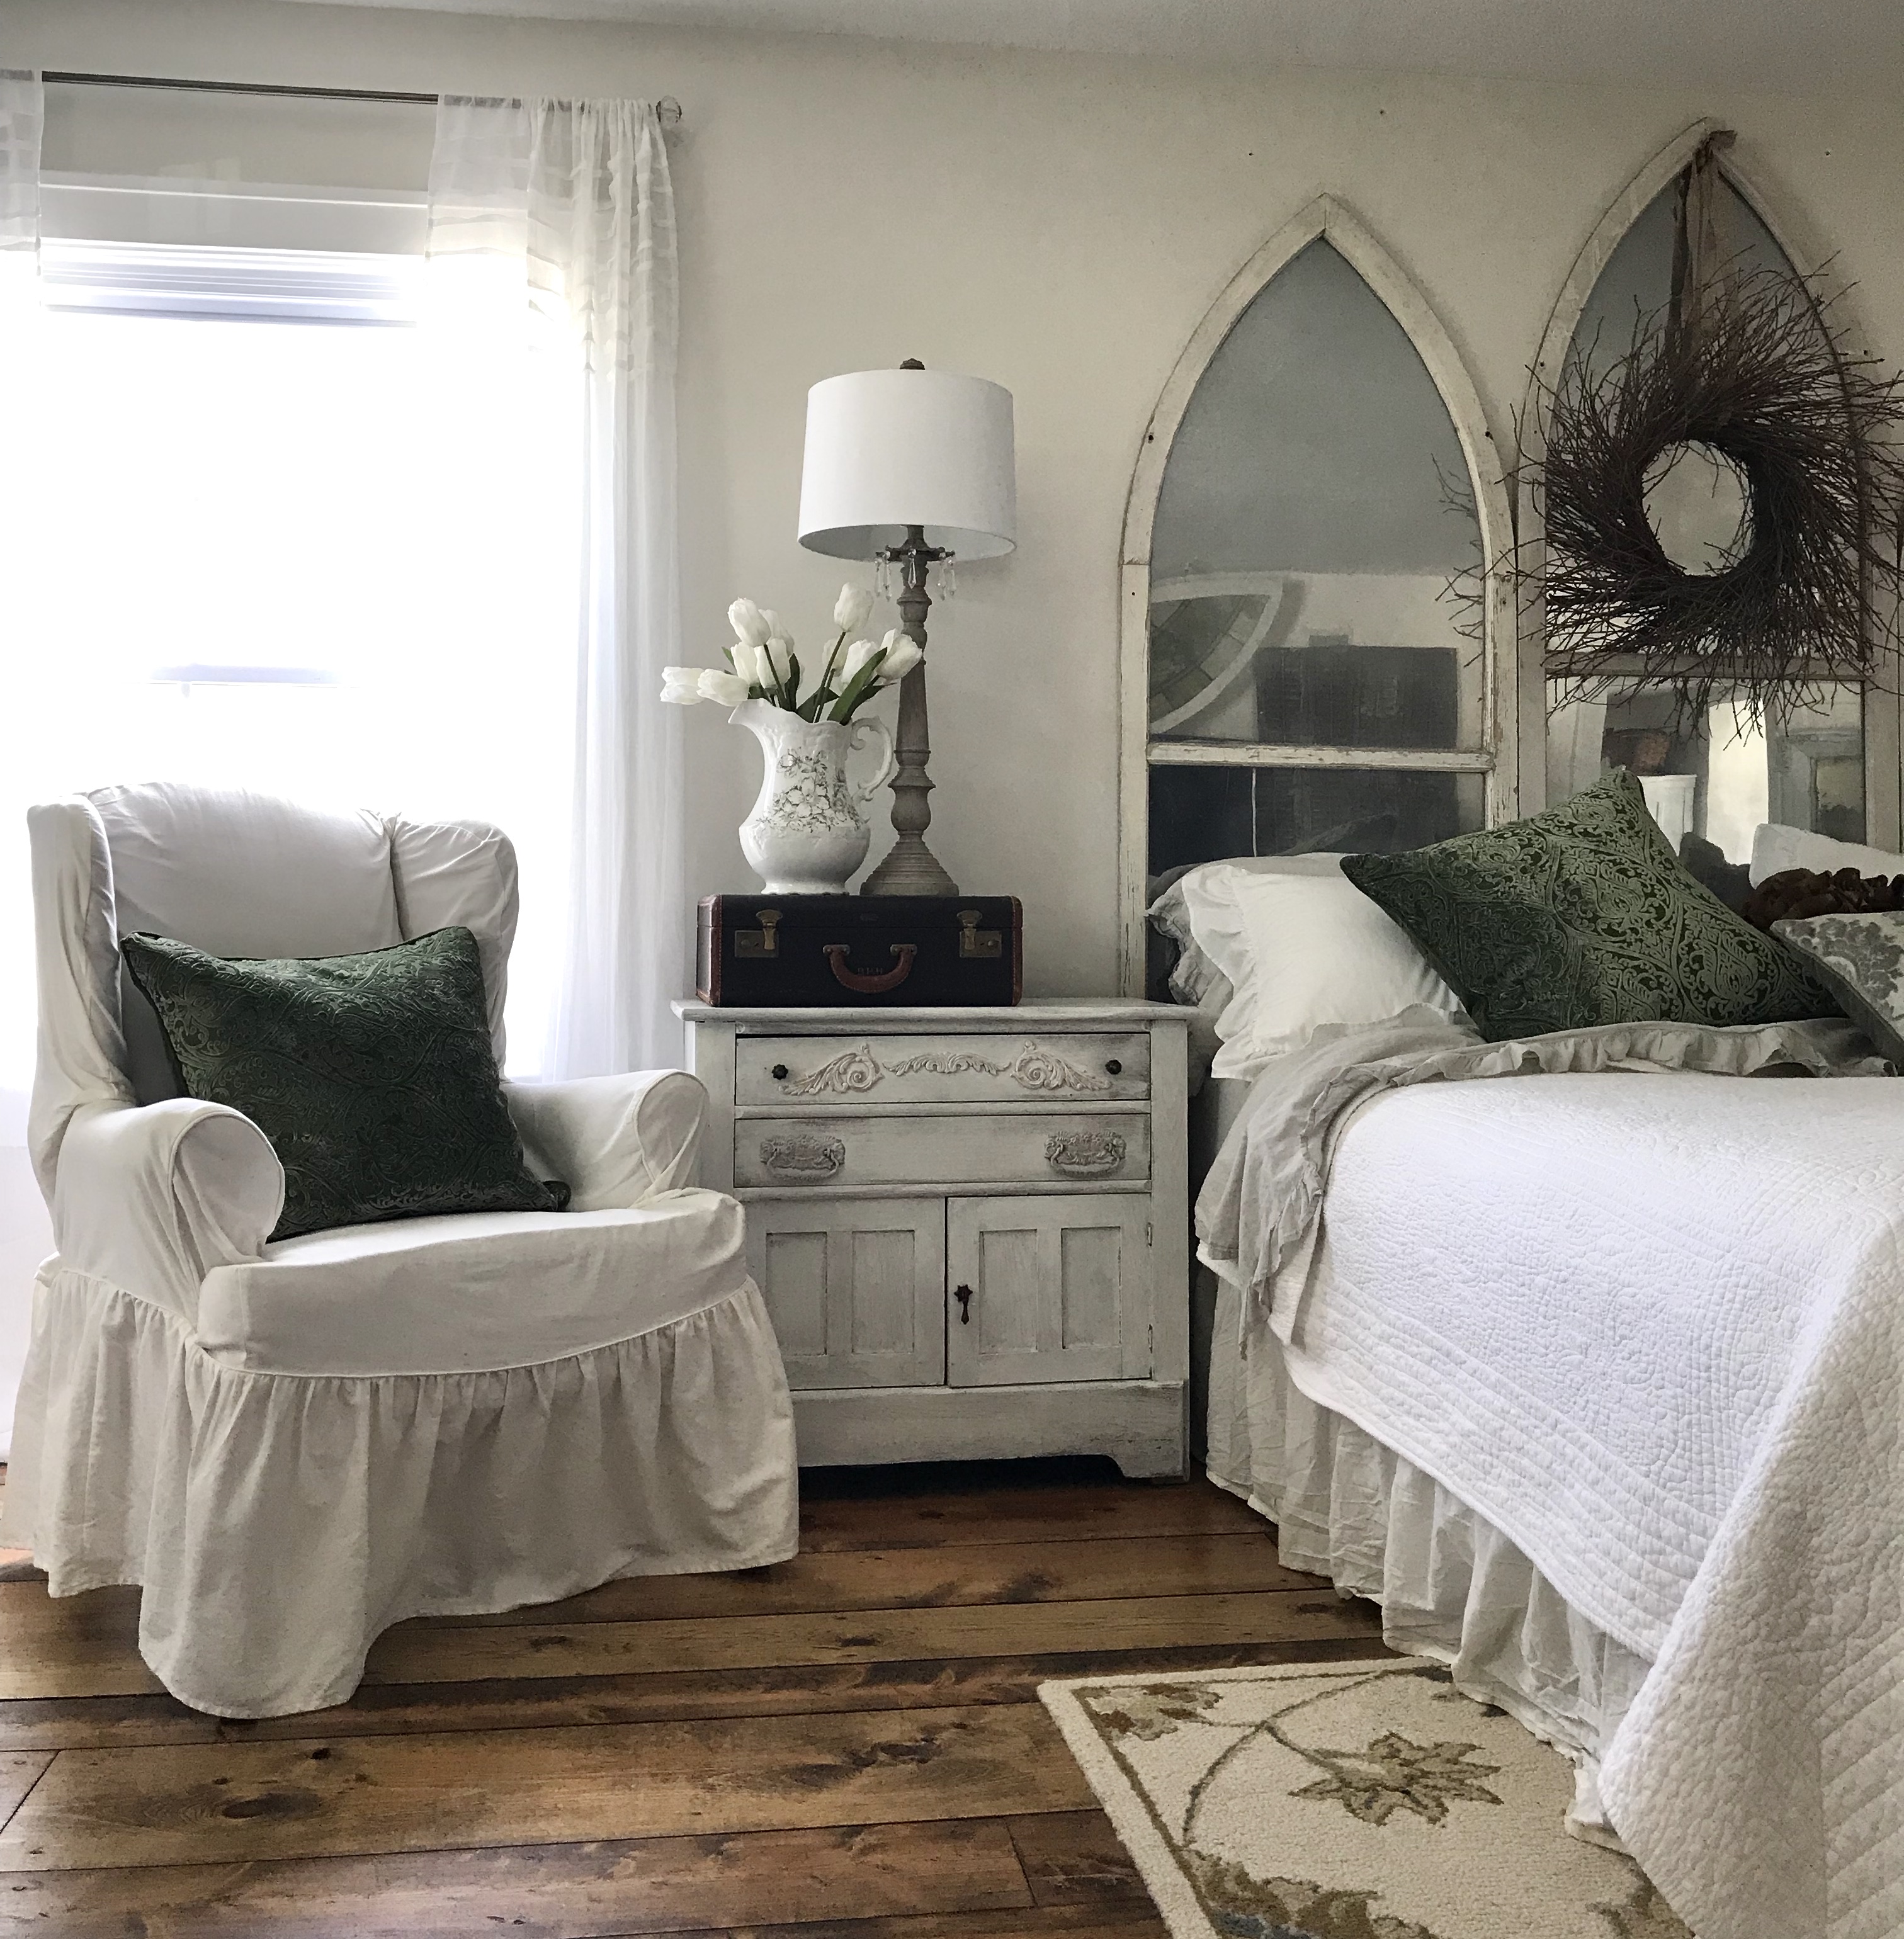 Master bedroom head board from windows - House on Winchester